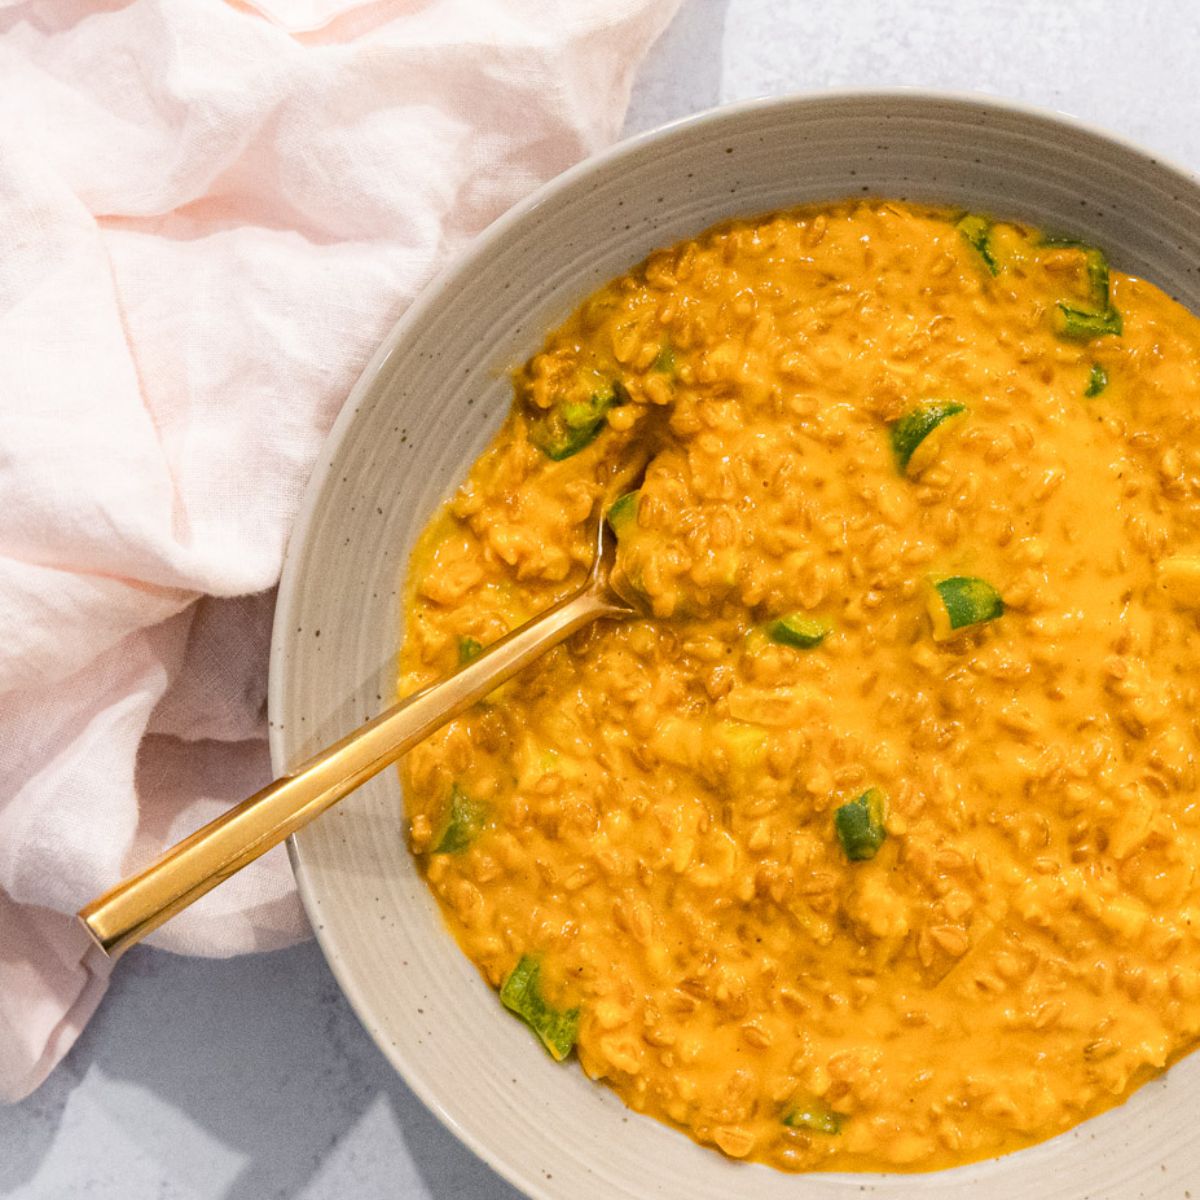 Bright orange-yellow Risotto in a stoneware bowl with a gold spoon